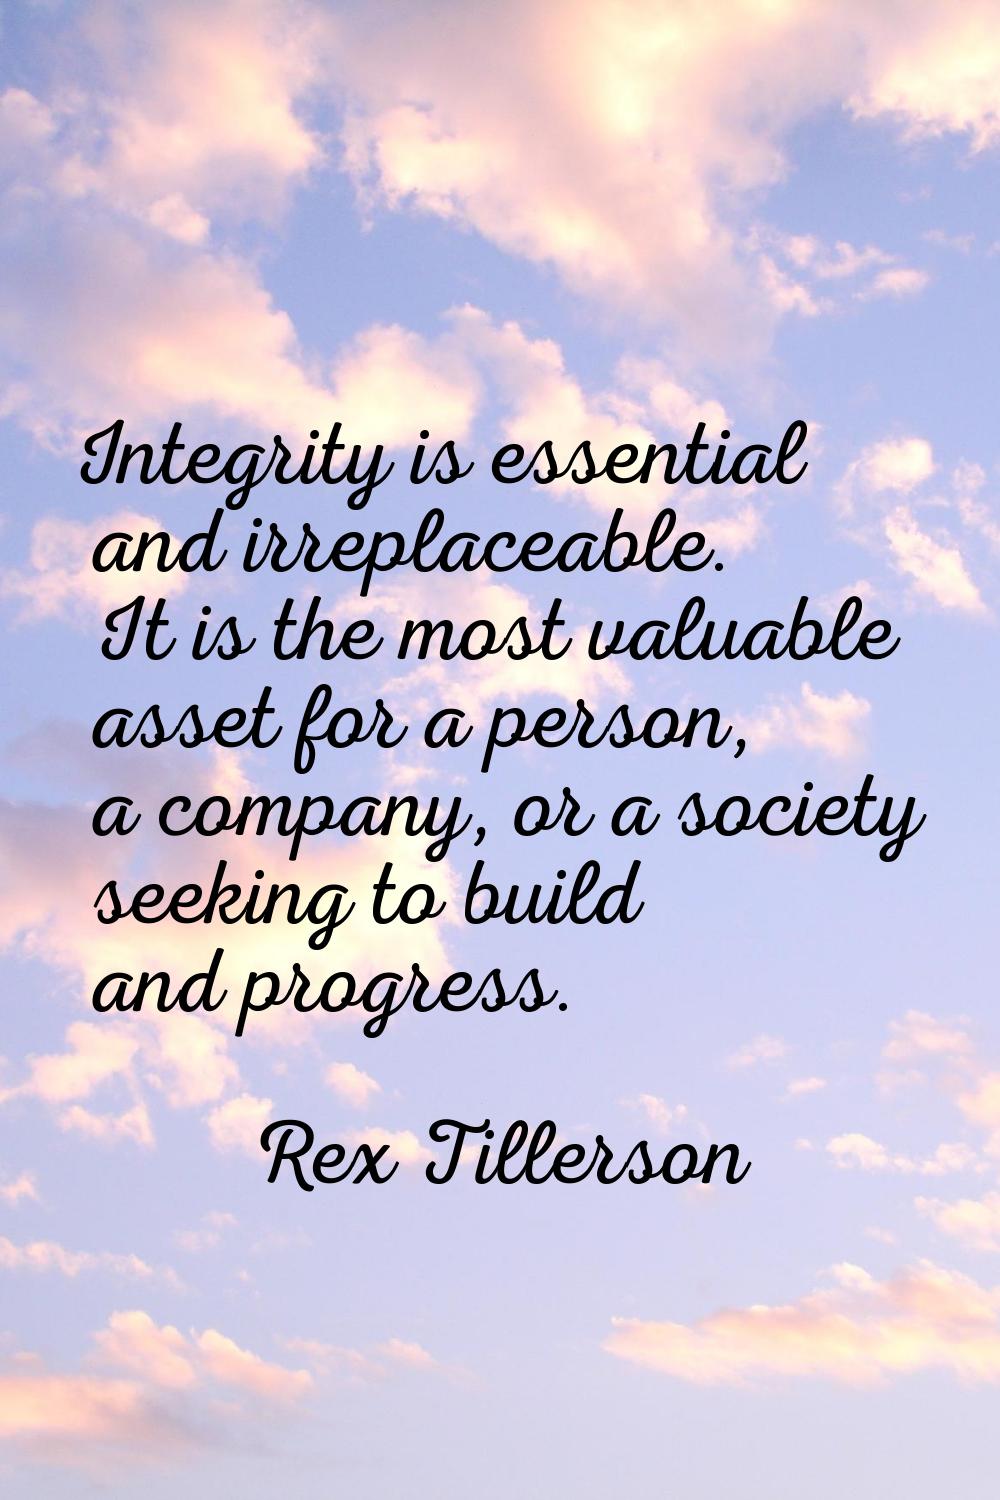 Integrity is essential and irreplaceable. It is the most valuable asset for a person, a company, or